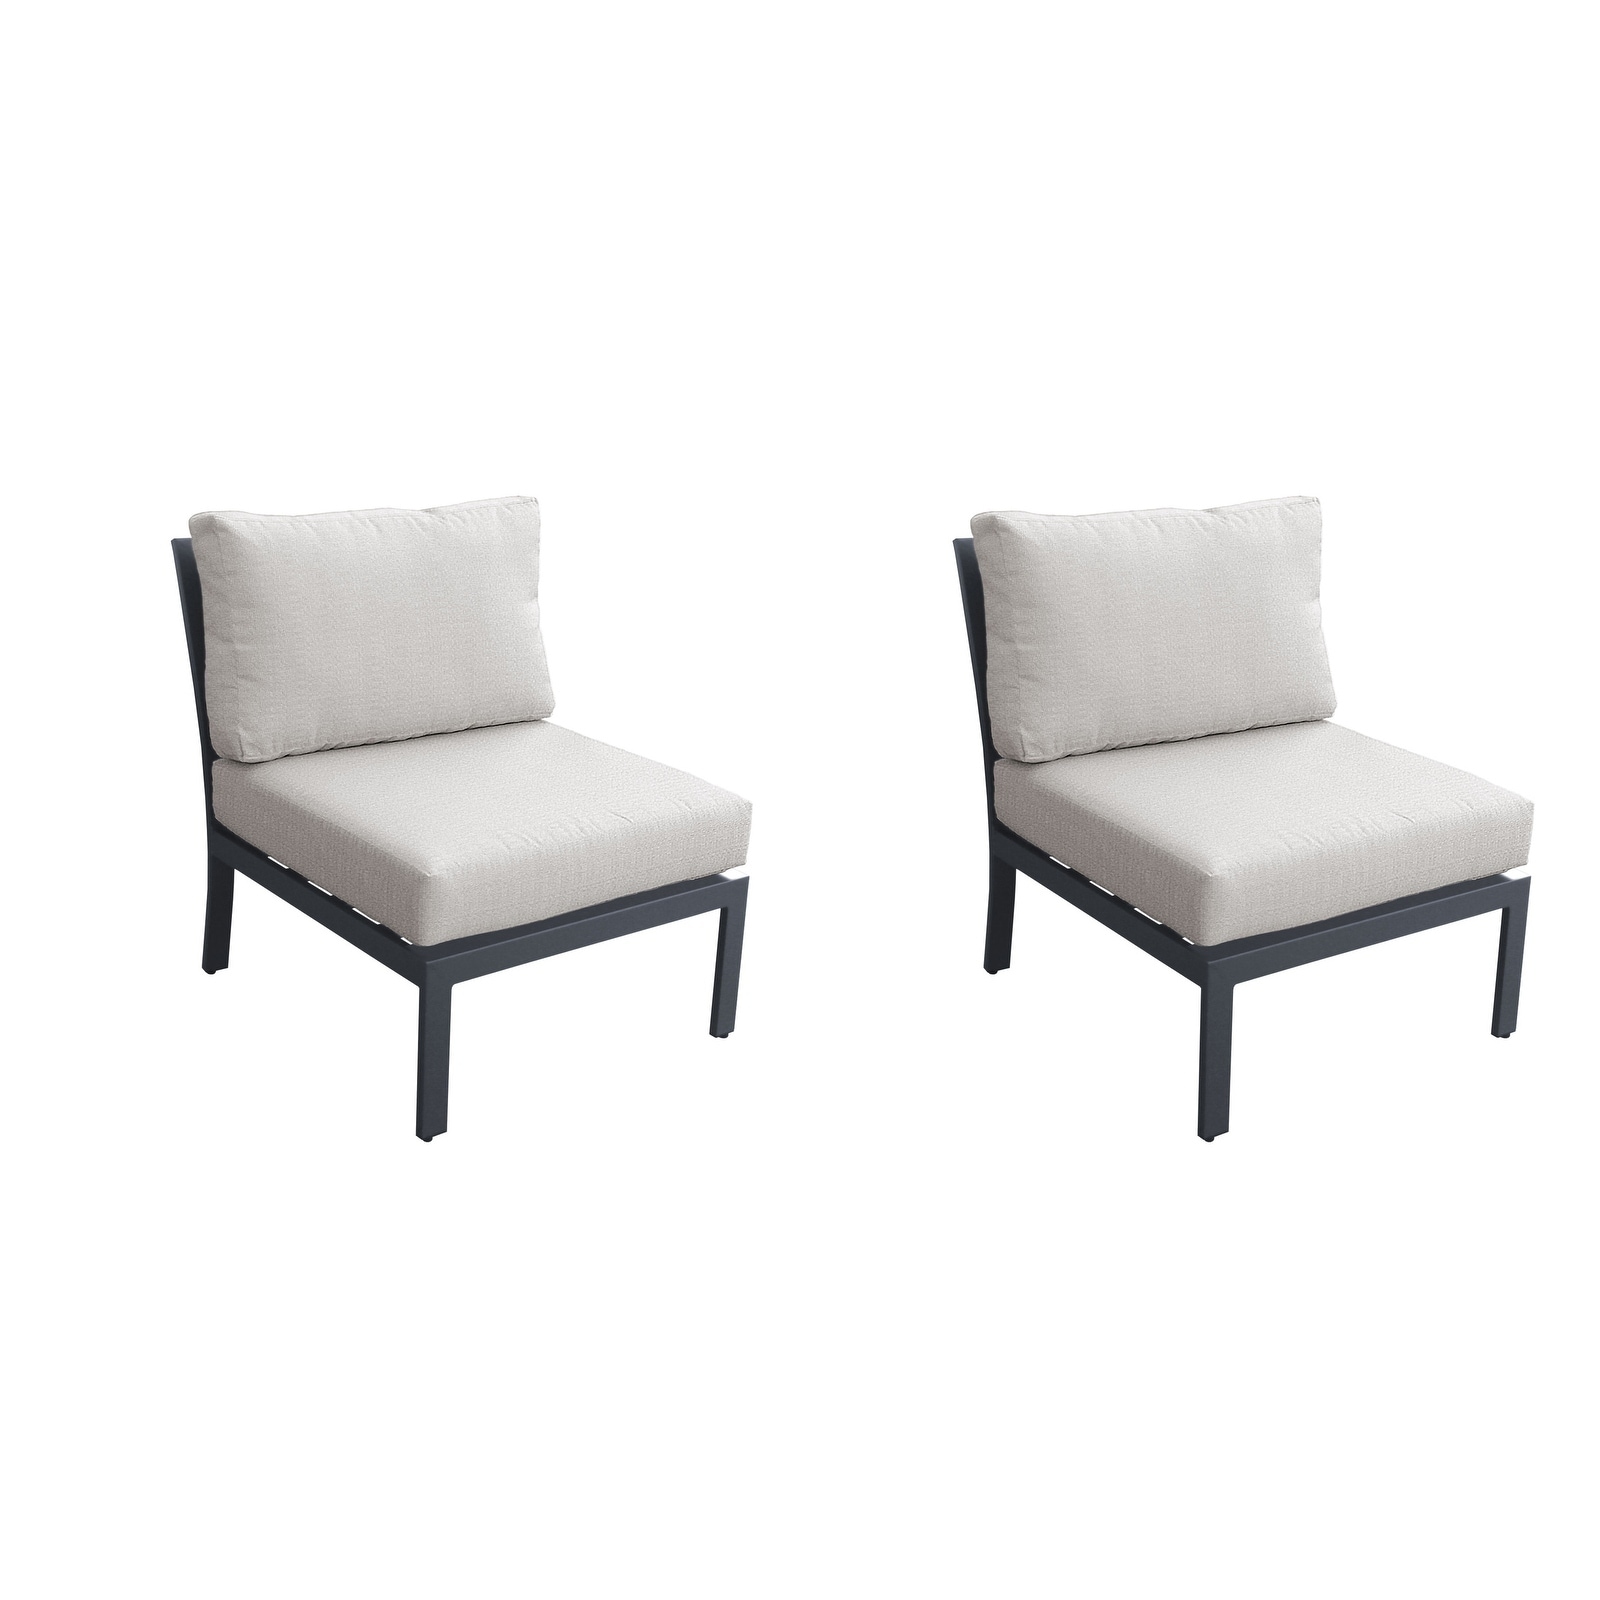 Moresby Armless Sofa (set Of 2) By Havenside Home